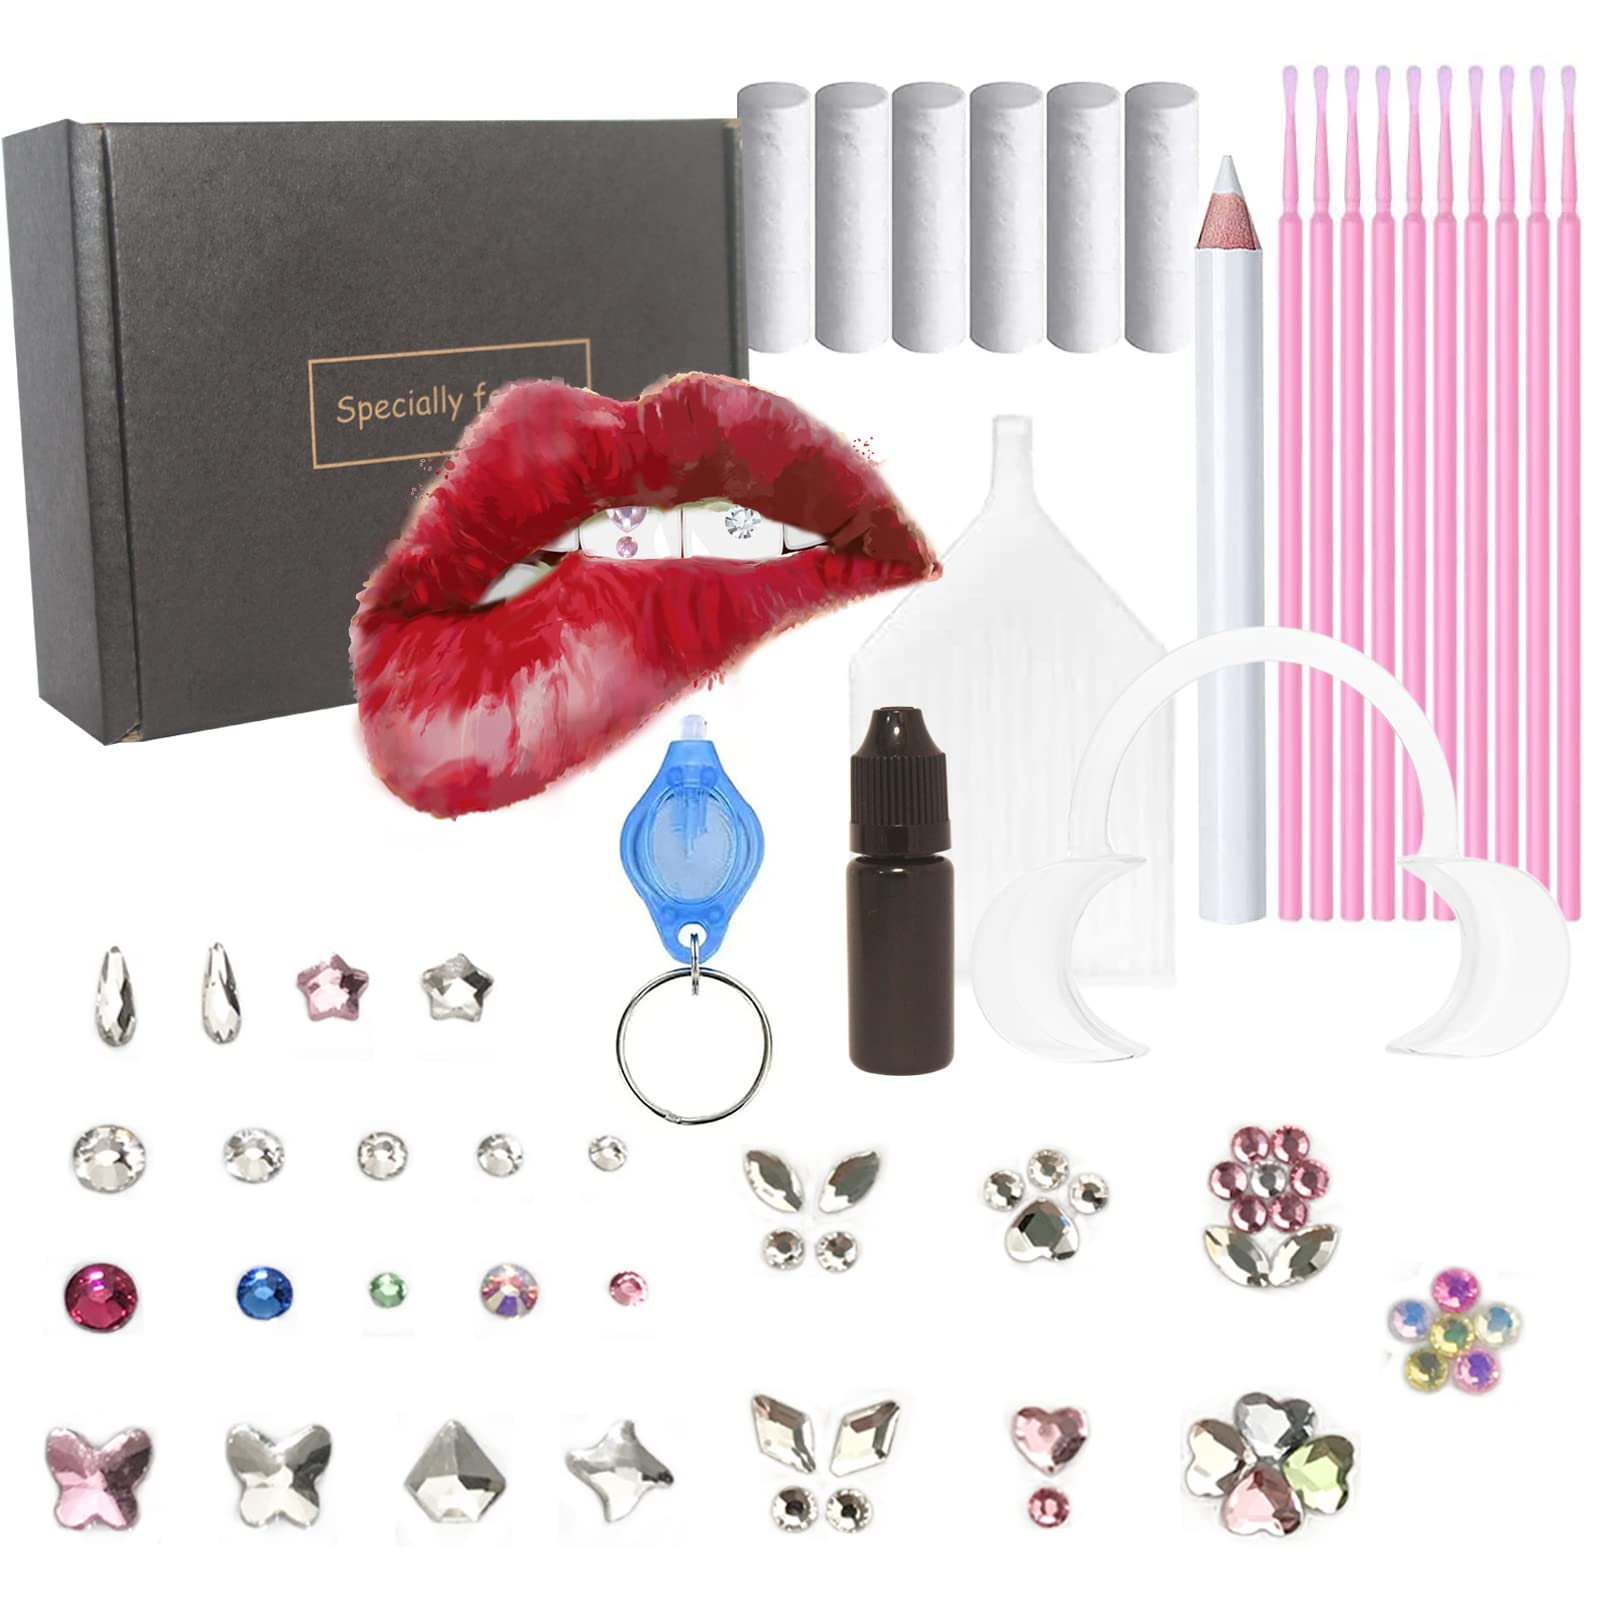 Tooth Gem Kit with Curing Light and Glue, Tooth Crystal Jewelry Starter Kit  with Glue and Crystals, Shining Smile Diy Fashionable Tooth Crystal Kit for  Starter 